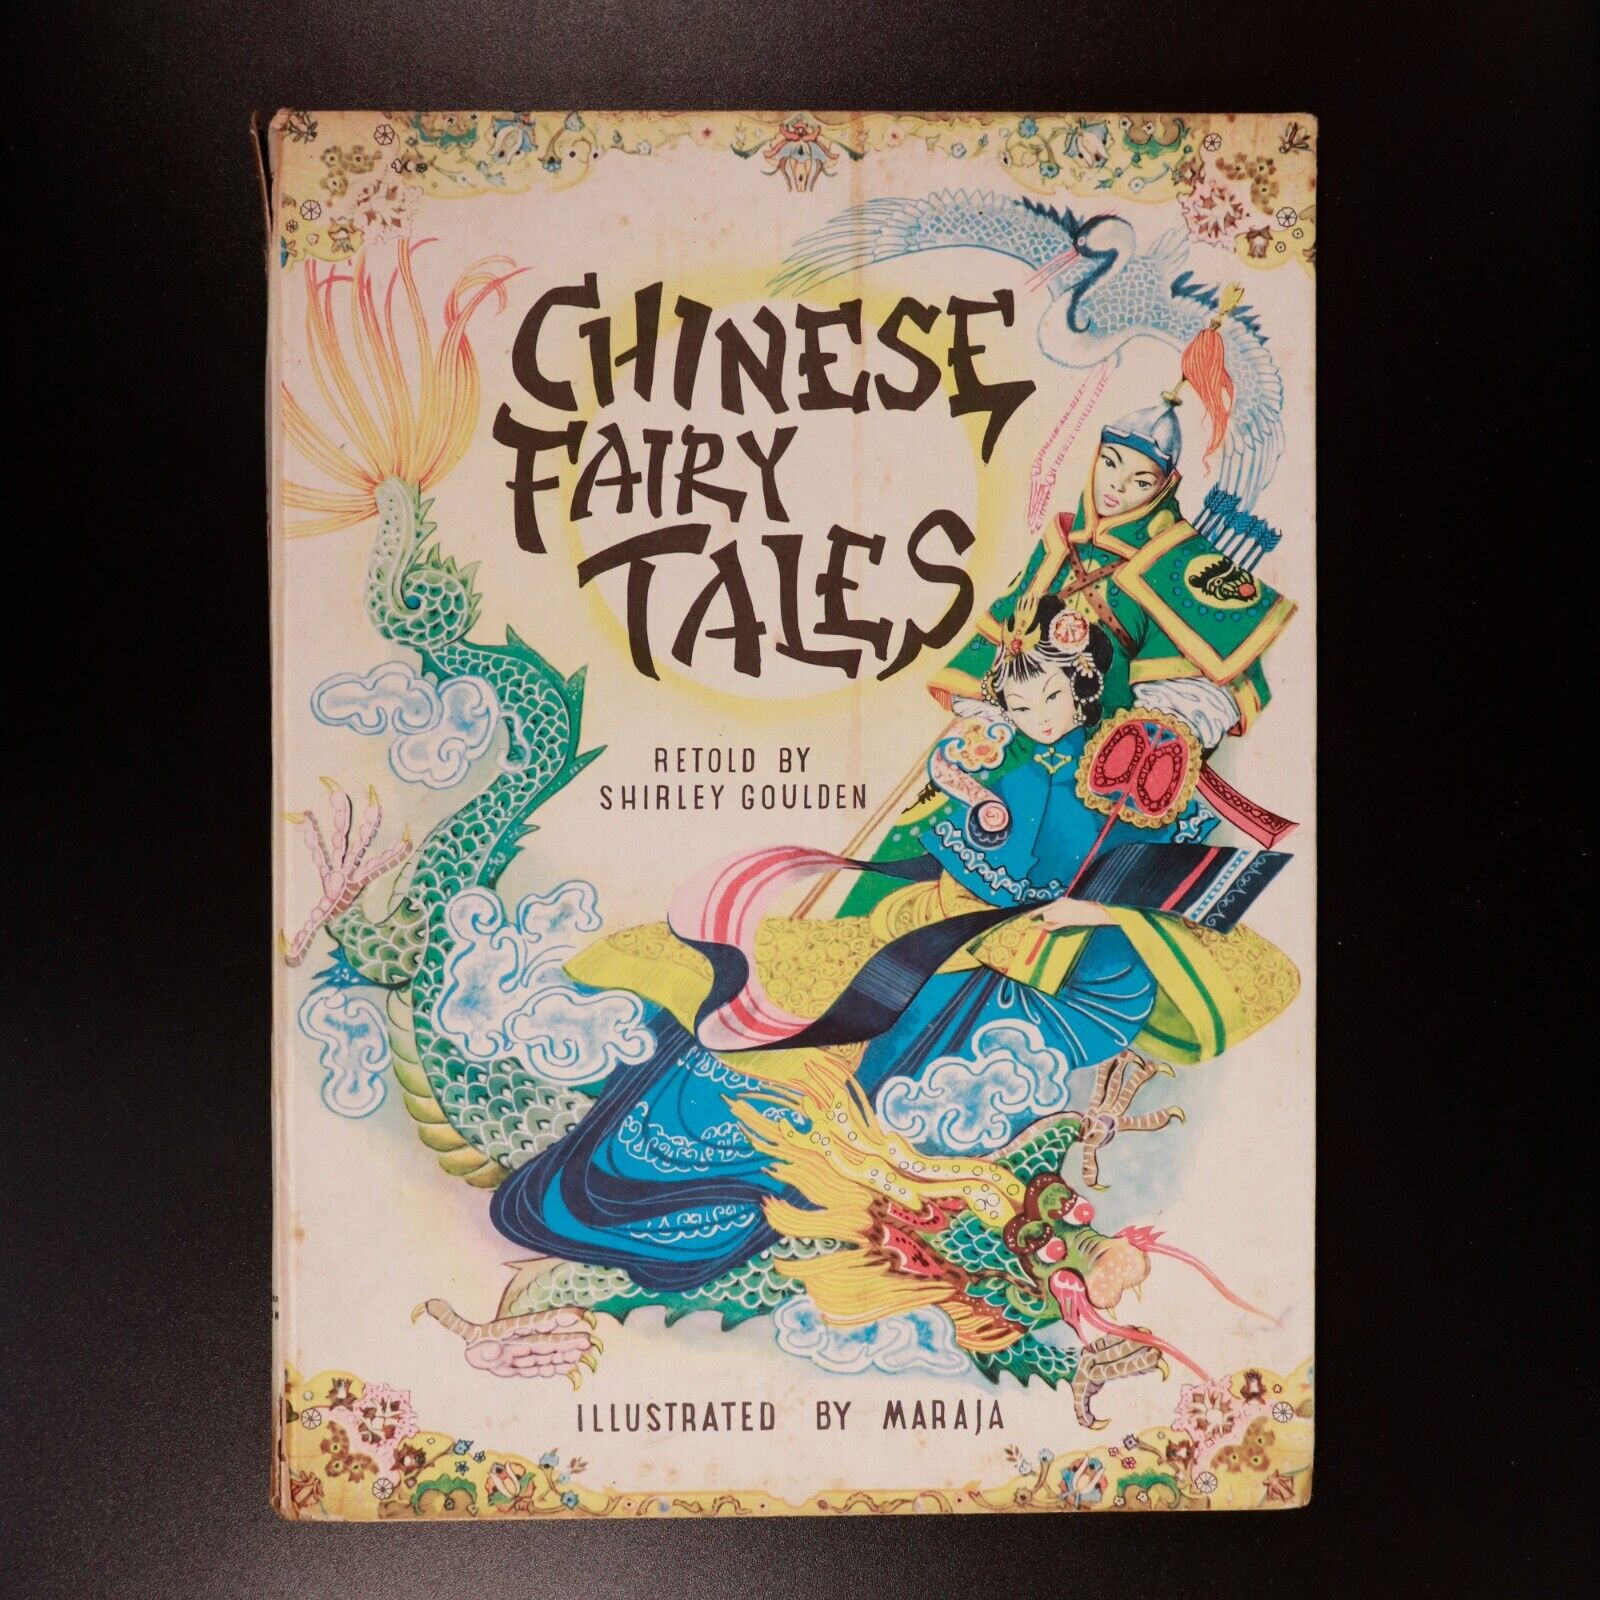 1958 Chinese Fairy Tales by Shirley Goulden Art by Maraja Children's Book